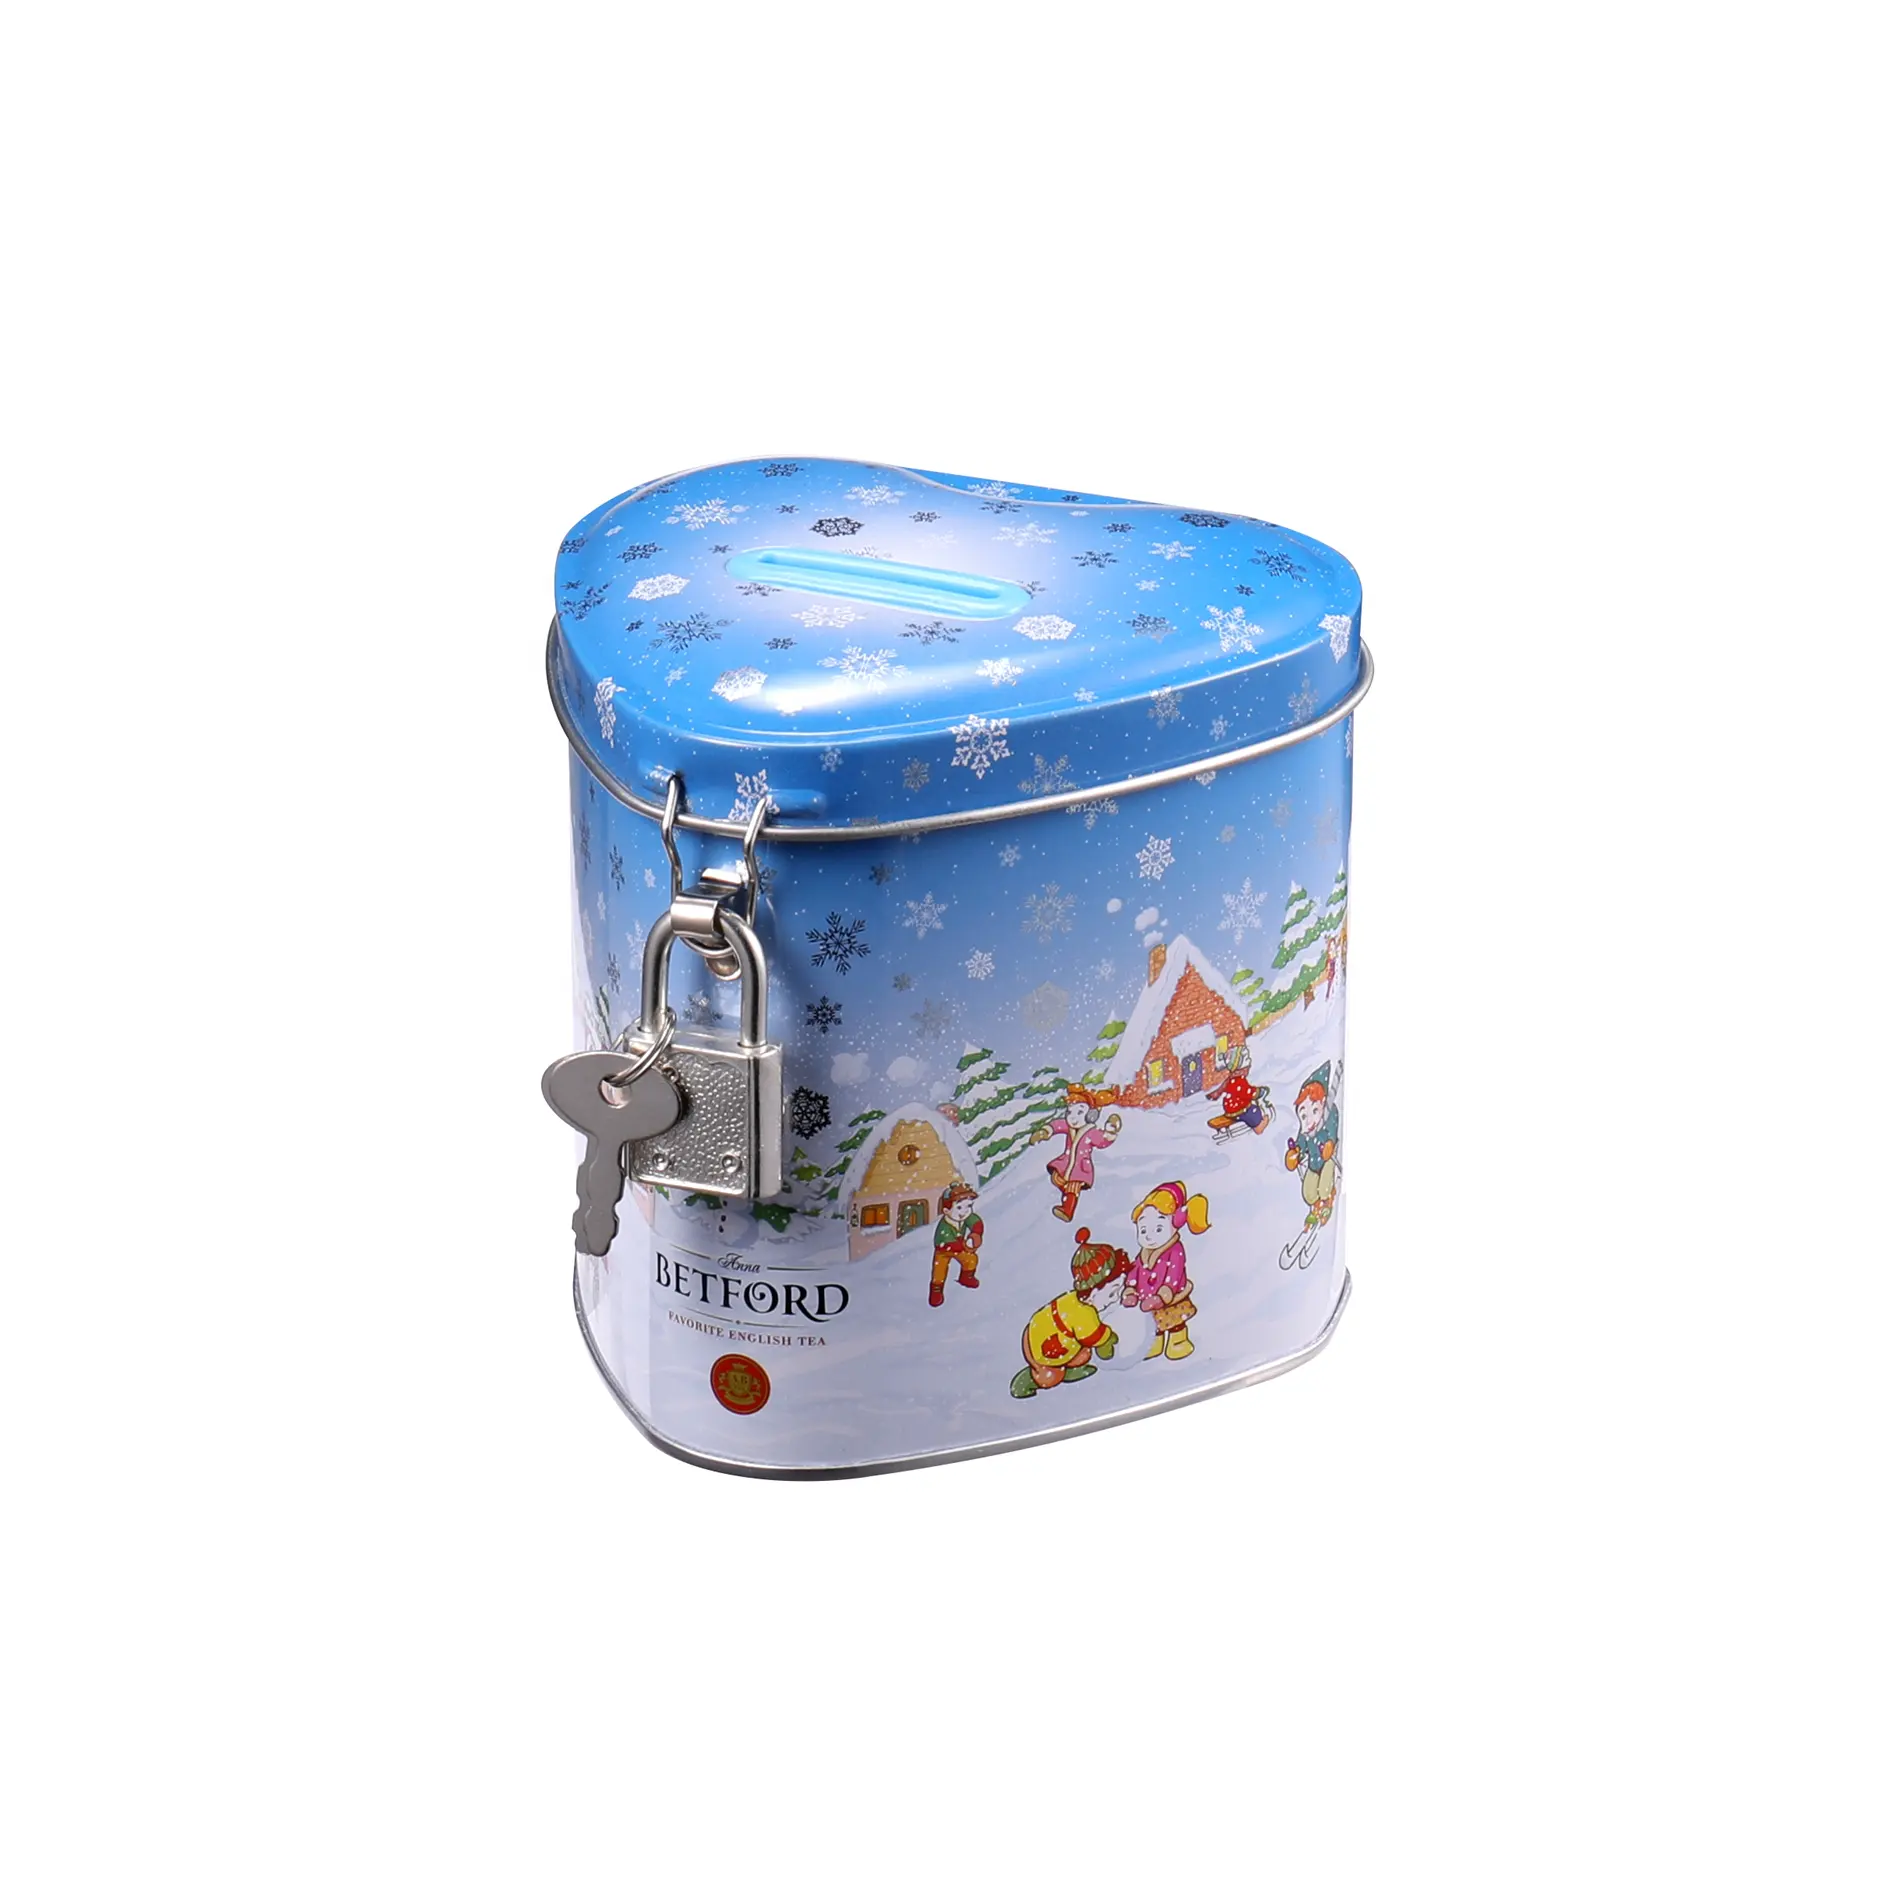 Cute Heart Shape Tin Coin Box for Kids Gift with Custom Printing High Quality Piggy Bank with Lock Saving Box